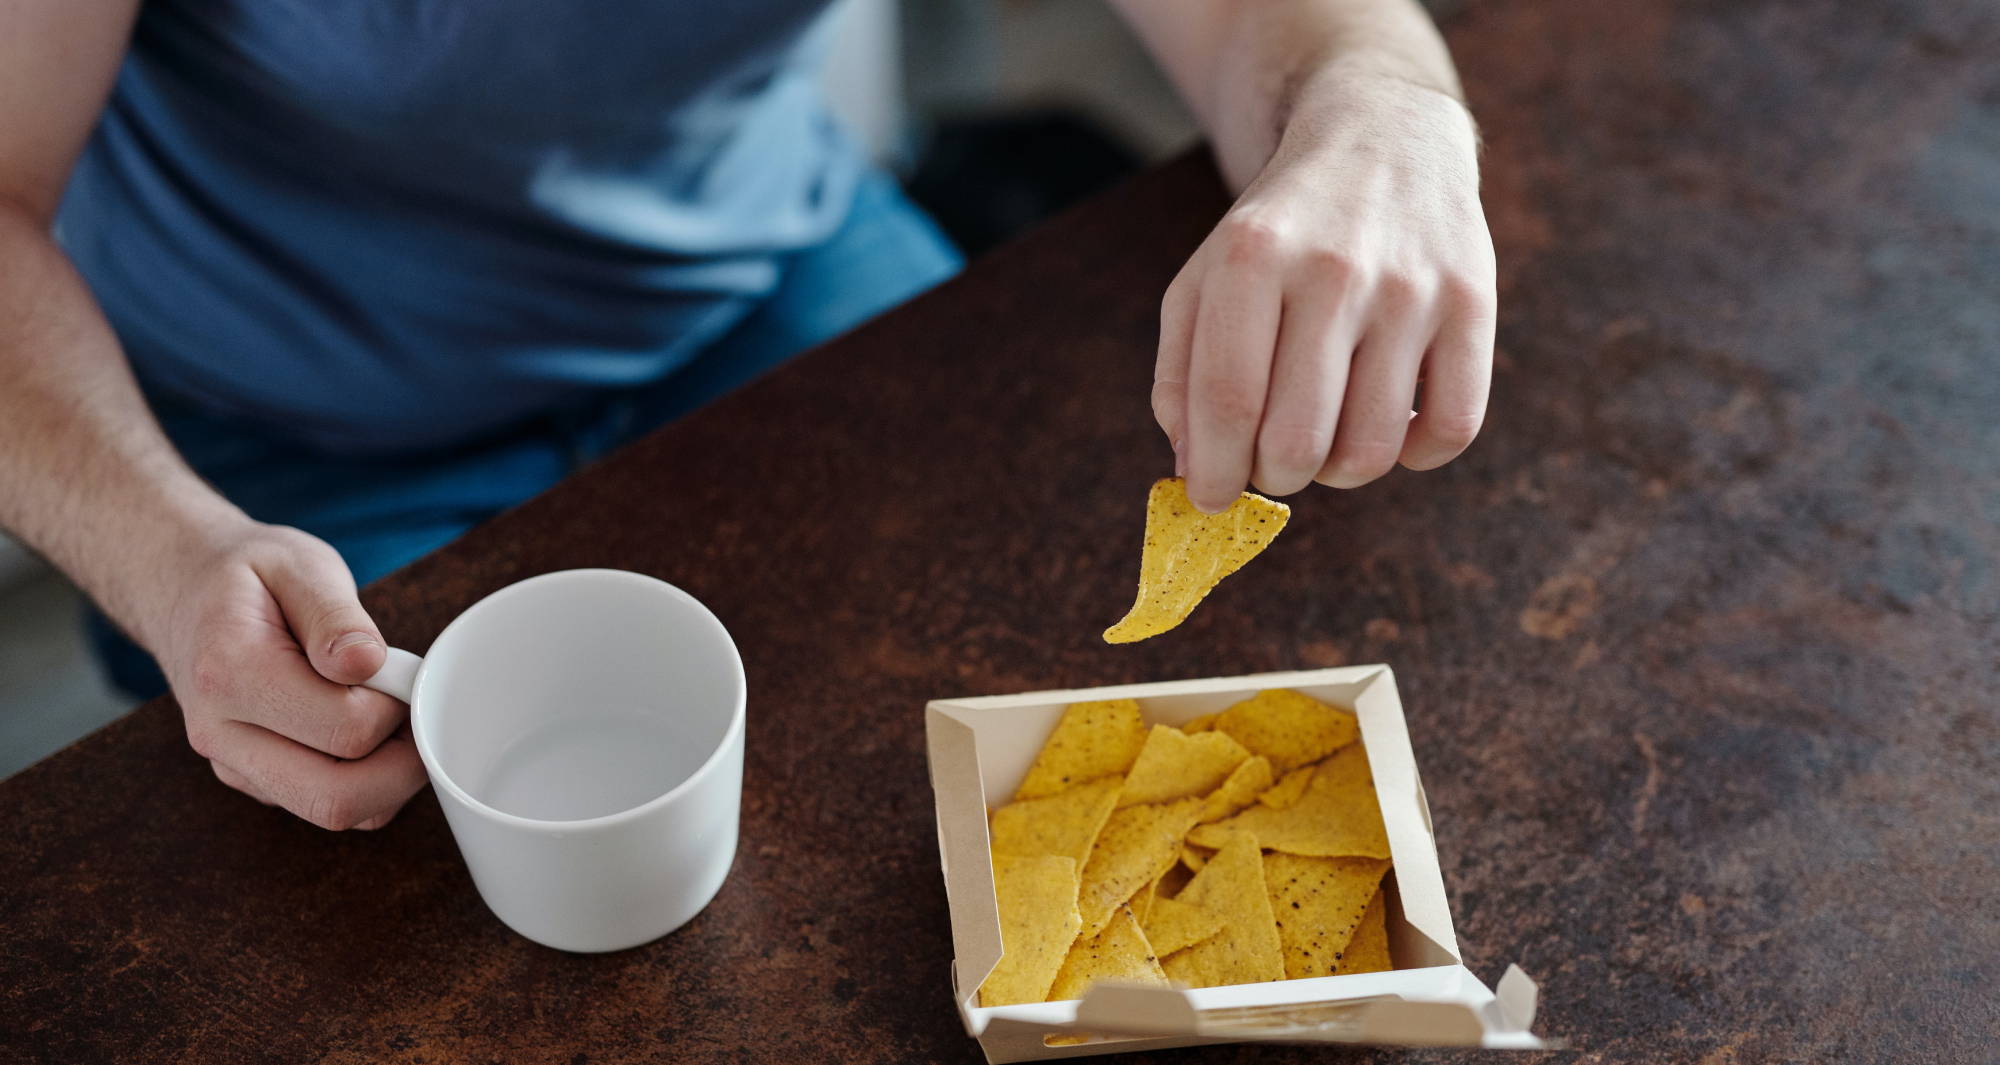 A man wearing a blue shirt holds a white mug and takes a tortilla chip out of a white paper box.